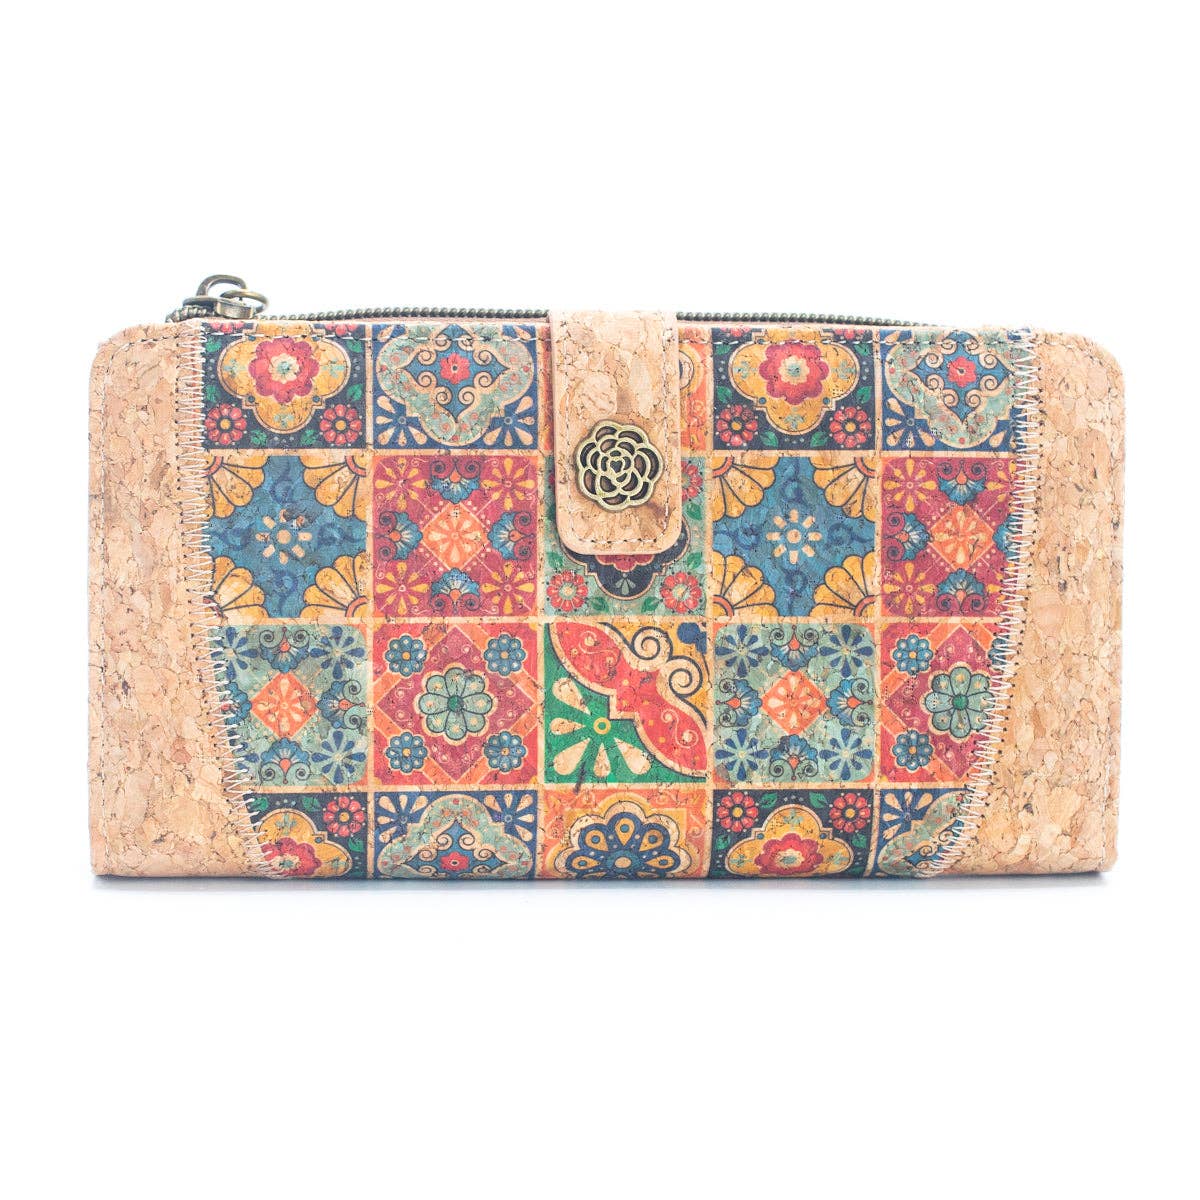 Printed Natural Cork Women's Wallet | THE CORK COLLECTION